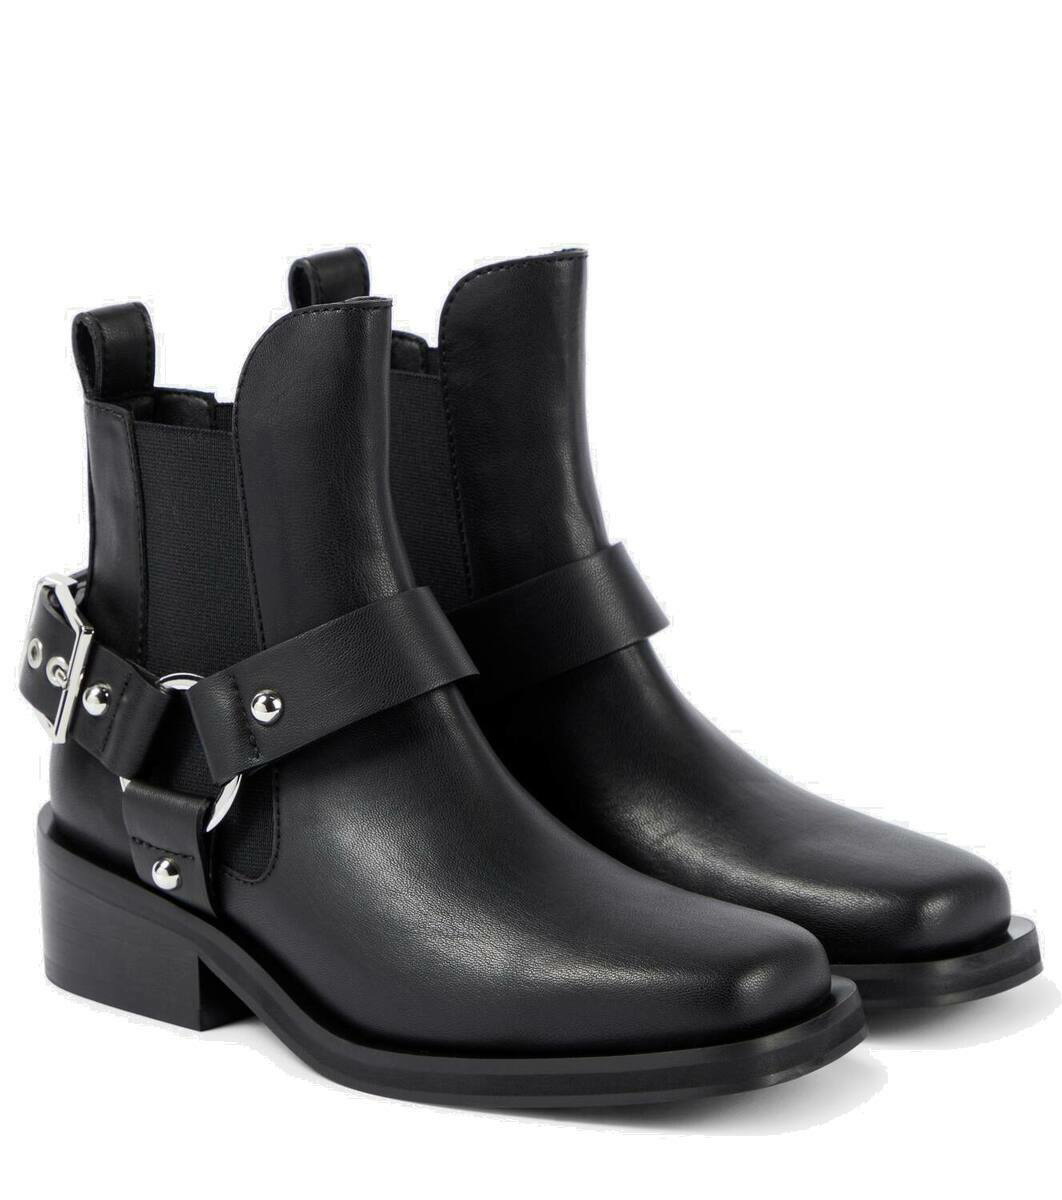 Black embroidered leather cowboy boots Given - Vienty